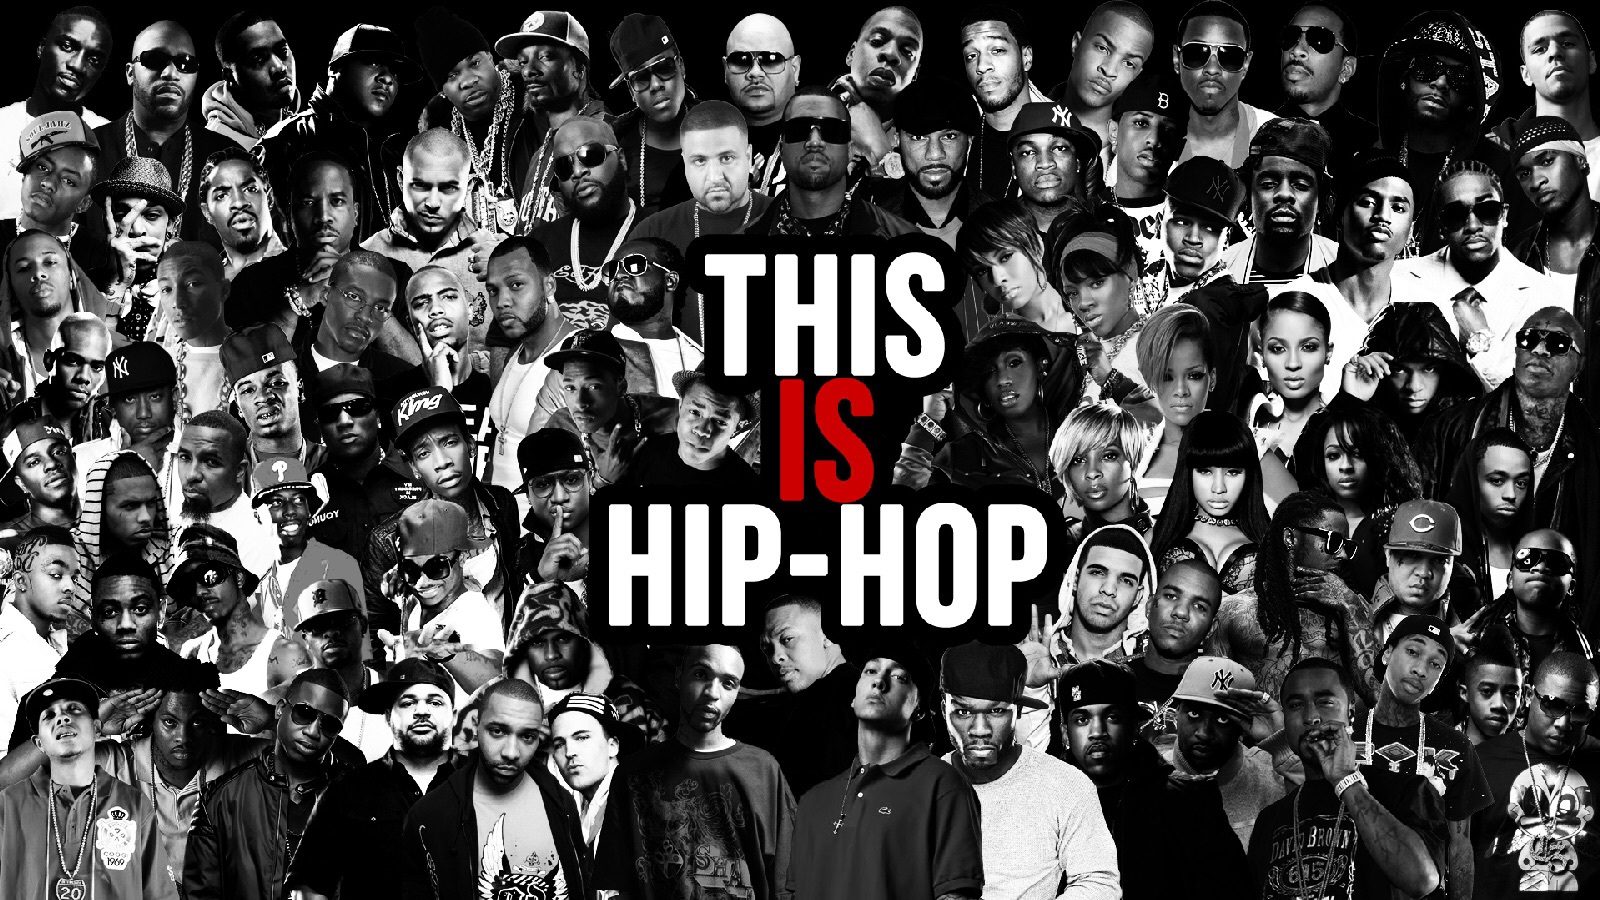 How Hip Hop Has Influenced Society in a Positive Way